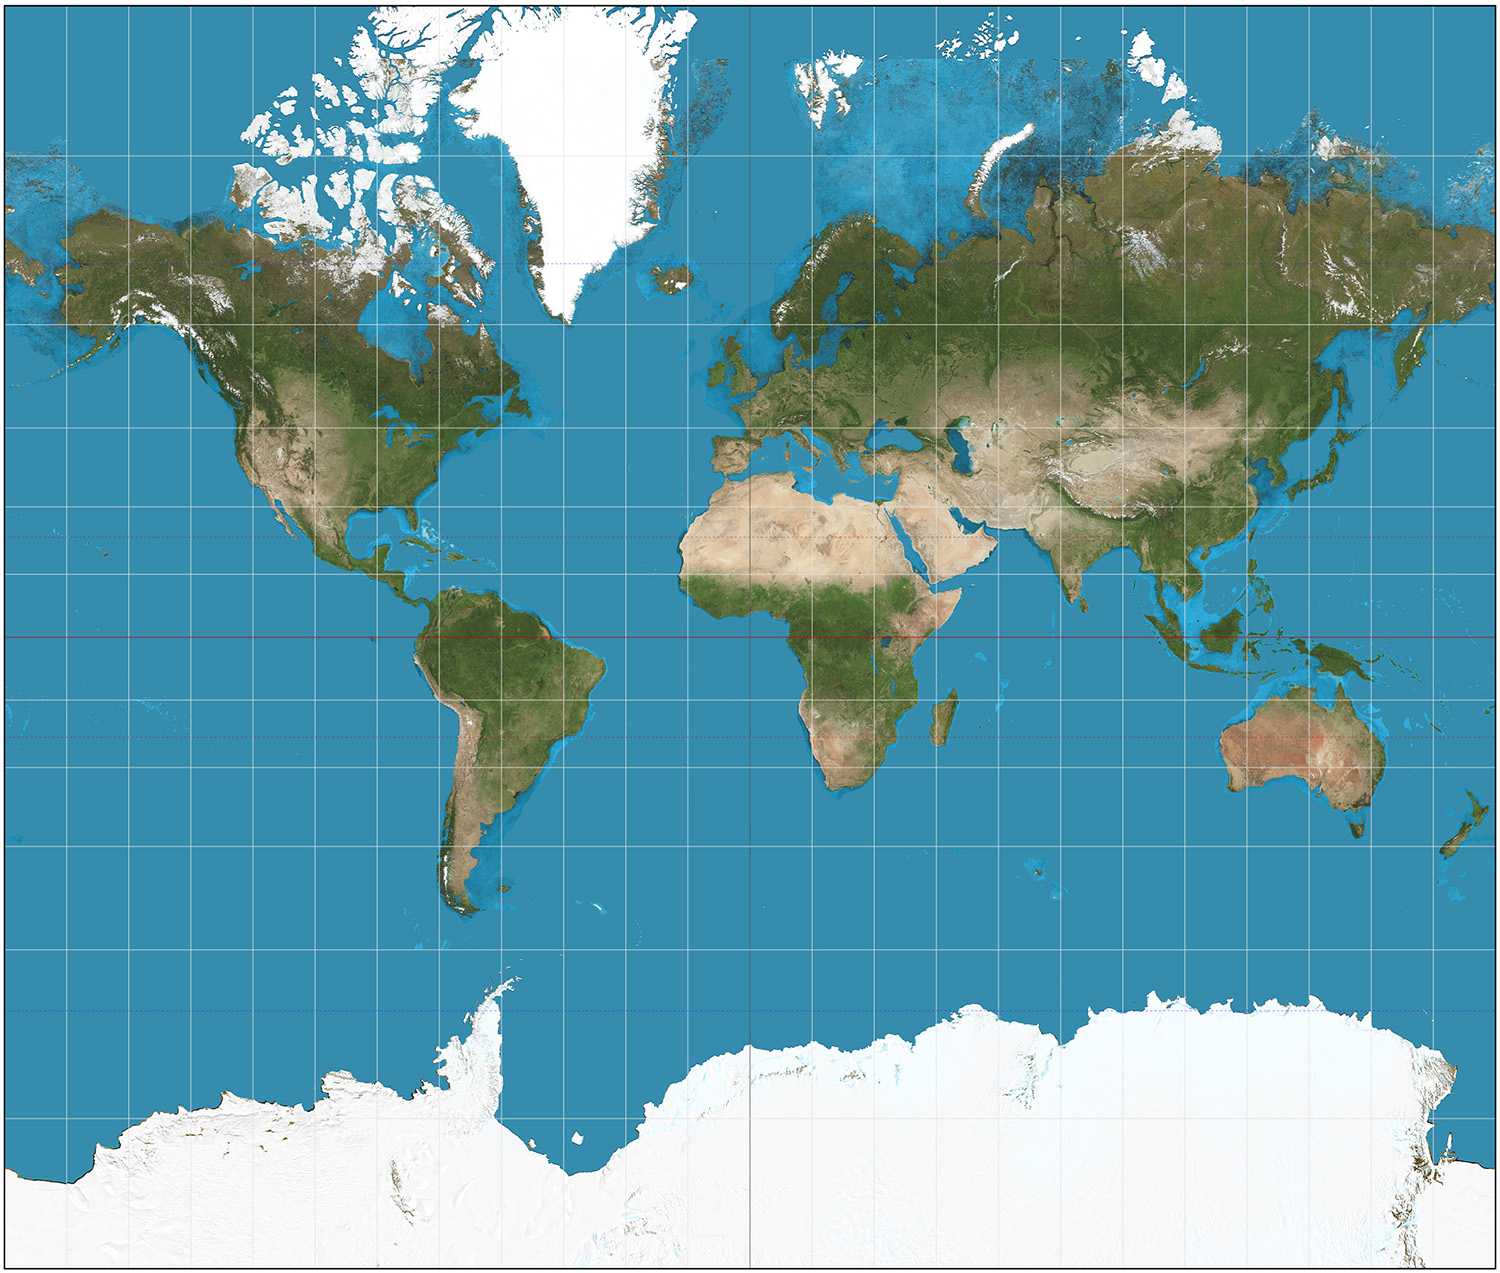 Mercator projection of the world centred around Europe.  Purpose of image is to highlight how a 2D representation of the world is not accurate.  © Daniel R. Strebe, 15 August 2011 / Wikimedia Commons / CC-BY-SA-3.0